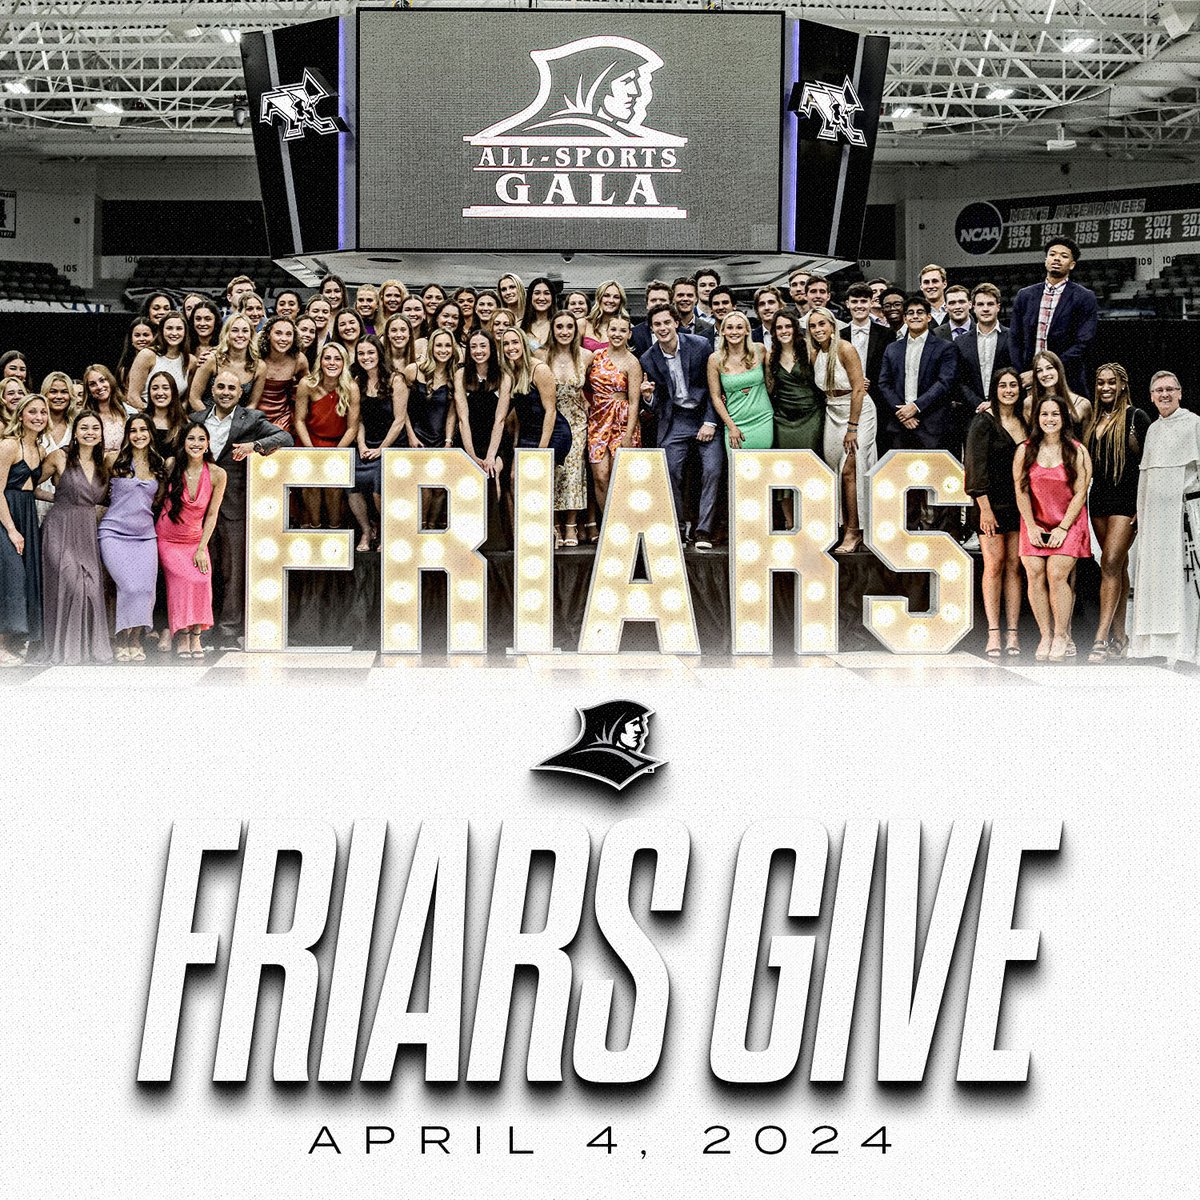 We are one day out from the Friars Give campaign! We need your help - no matter how big or small, donate to women's soccer! @PC_CoachLopes donate.friarsgive.org/give